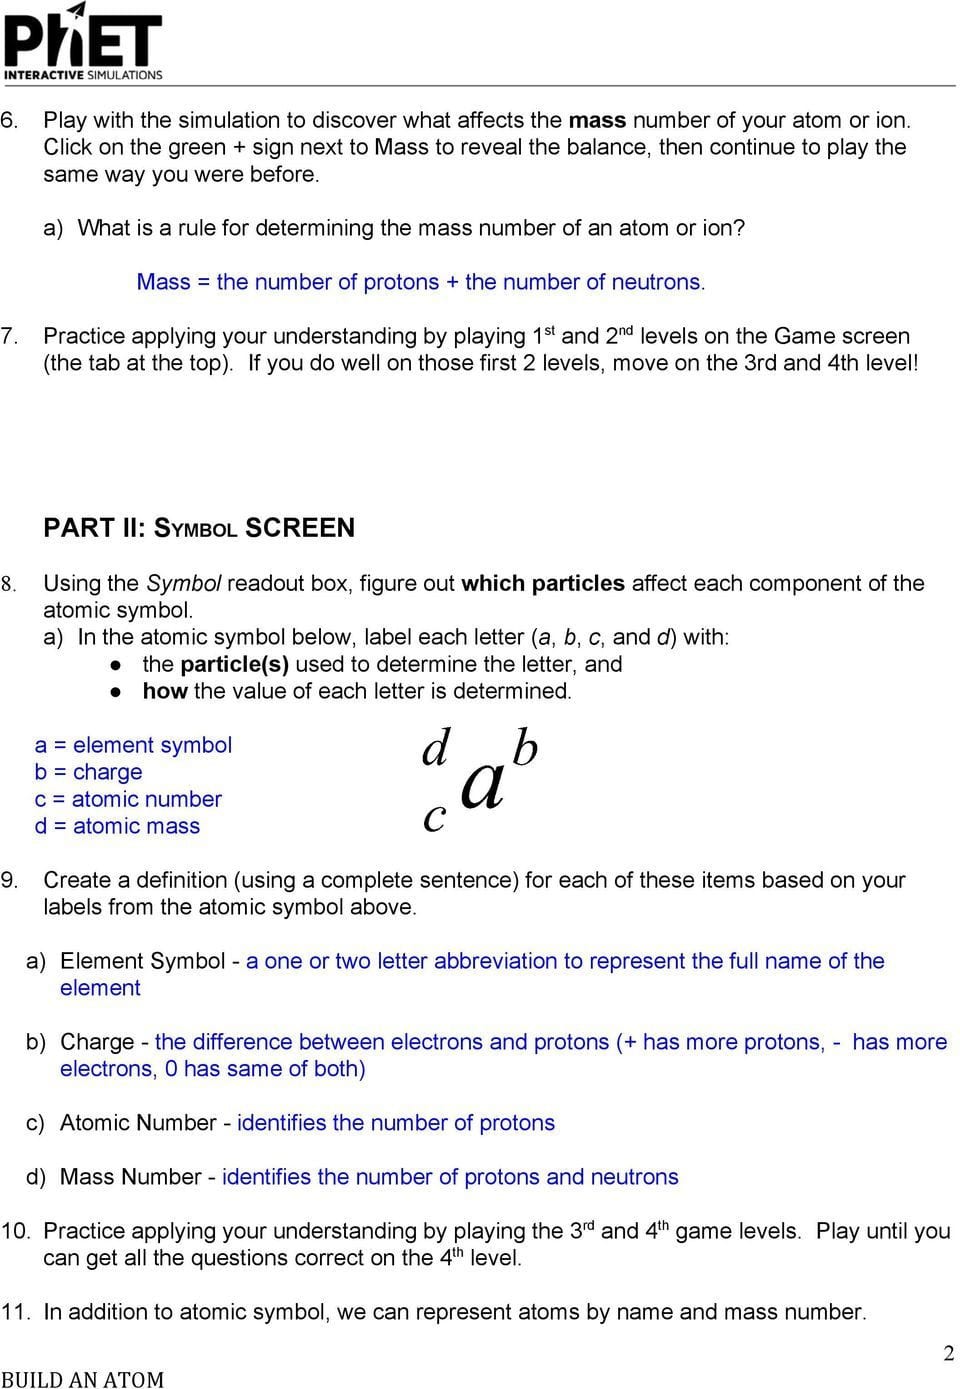 Chapter 3 Section 1 Basic Principles Worksheet Answers